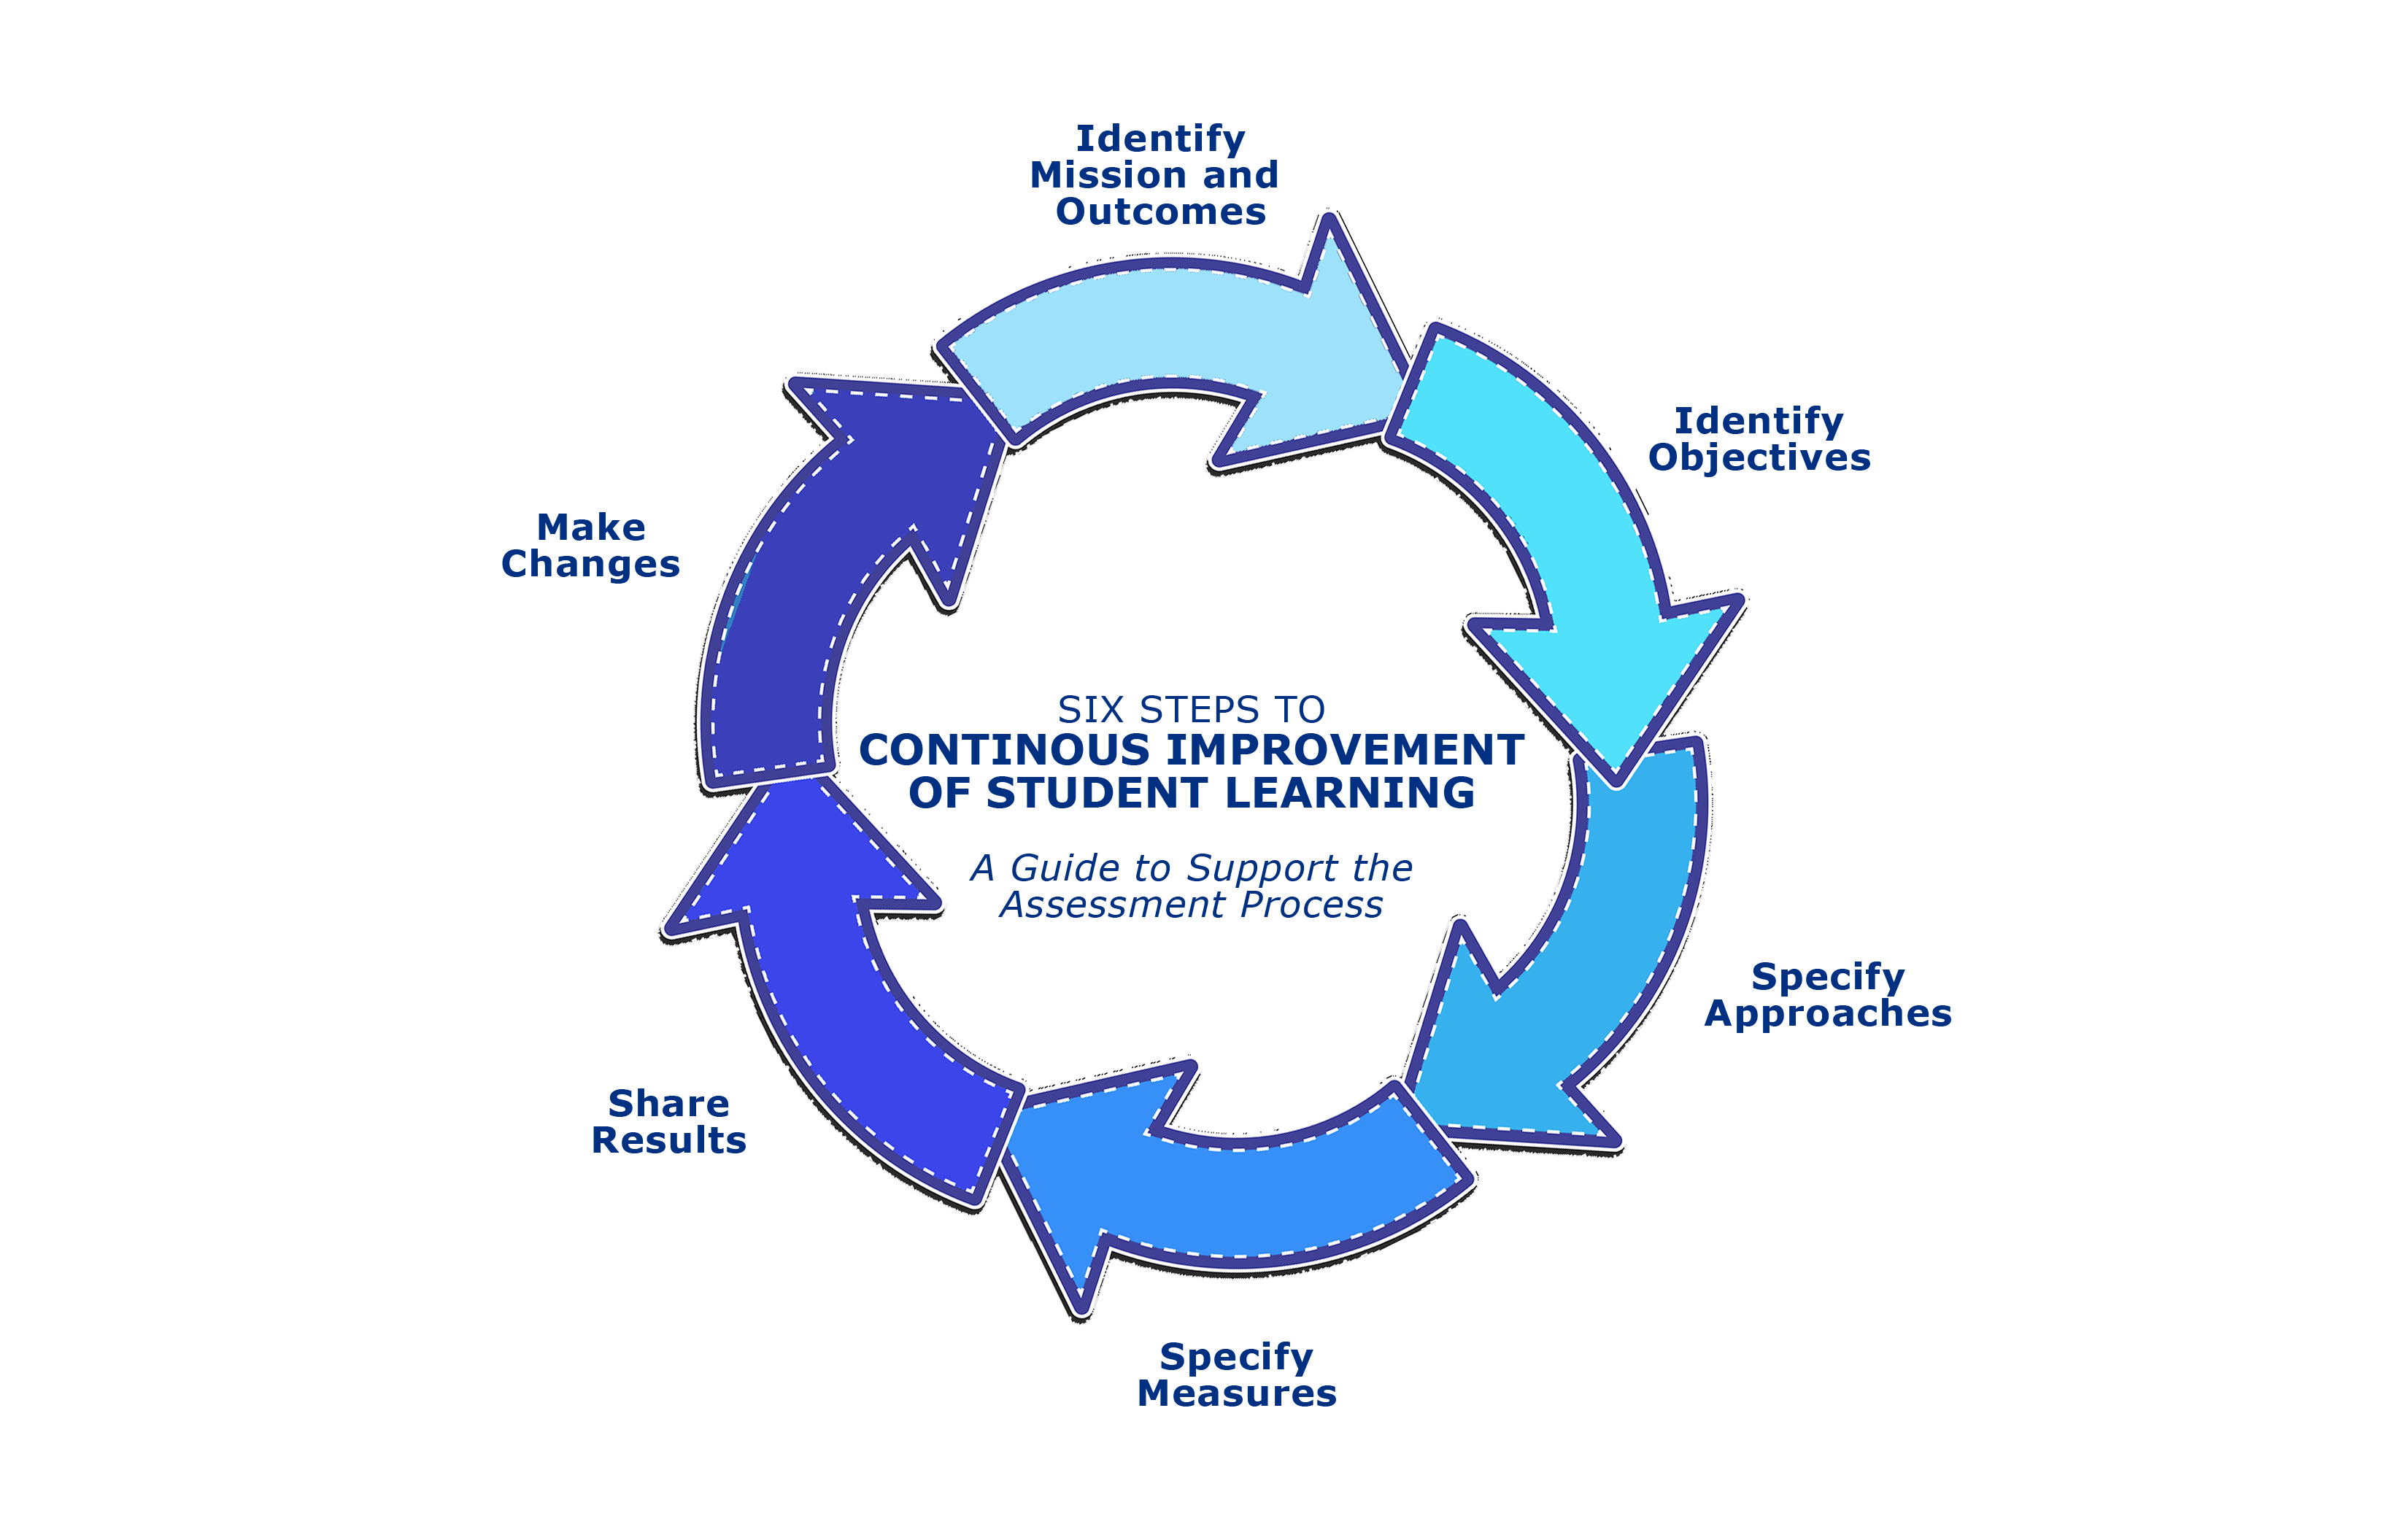 Closing-the-Loop-Assessment-Cycle-Steps.png